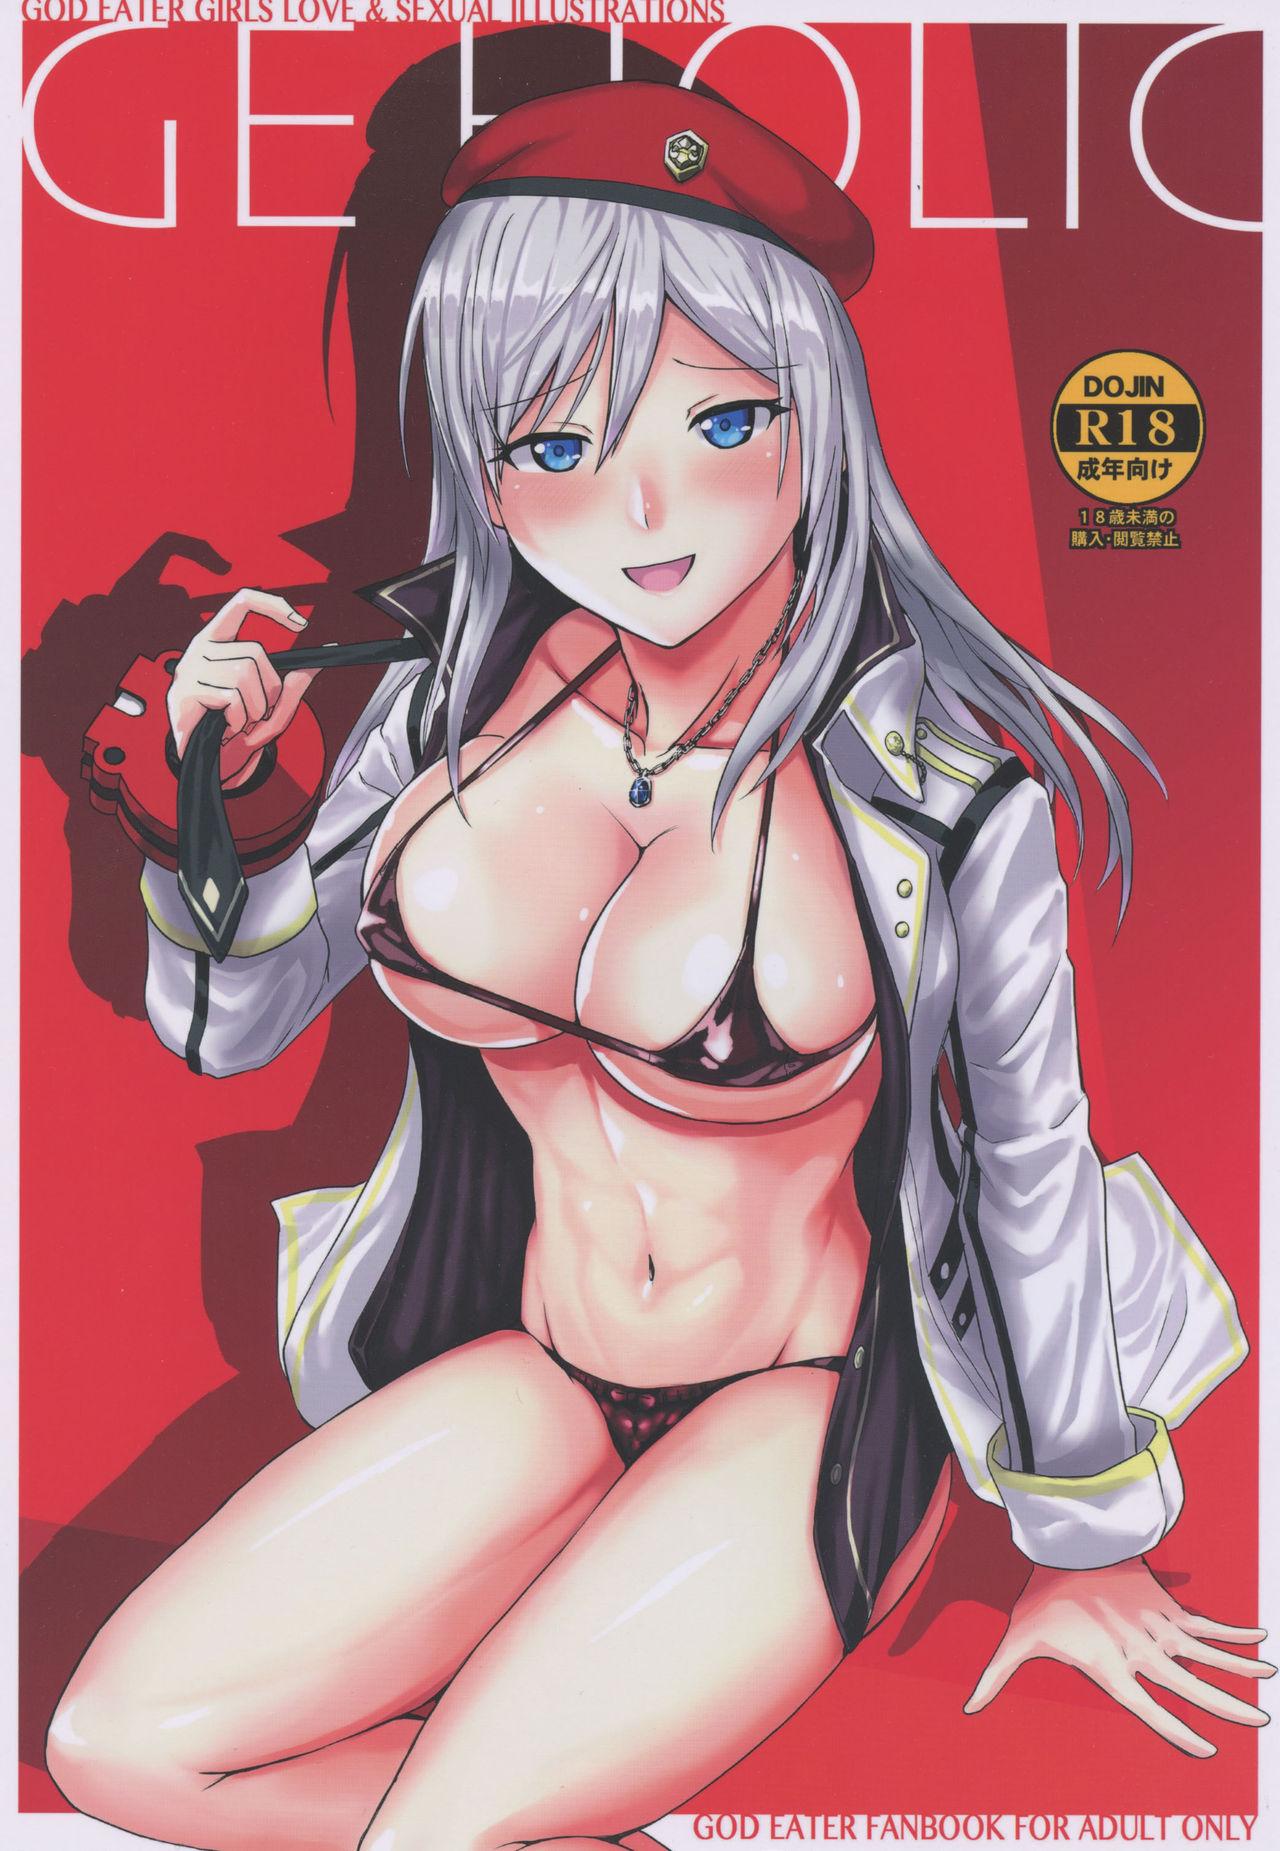 Interracial Hardcore GE HOLIC - God eater Price - Page 1